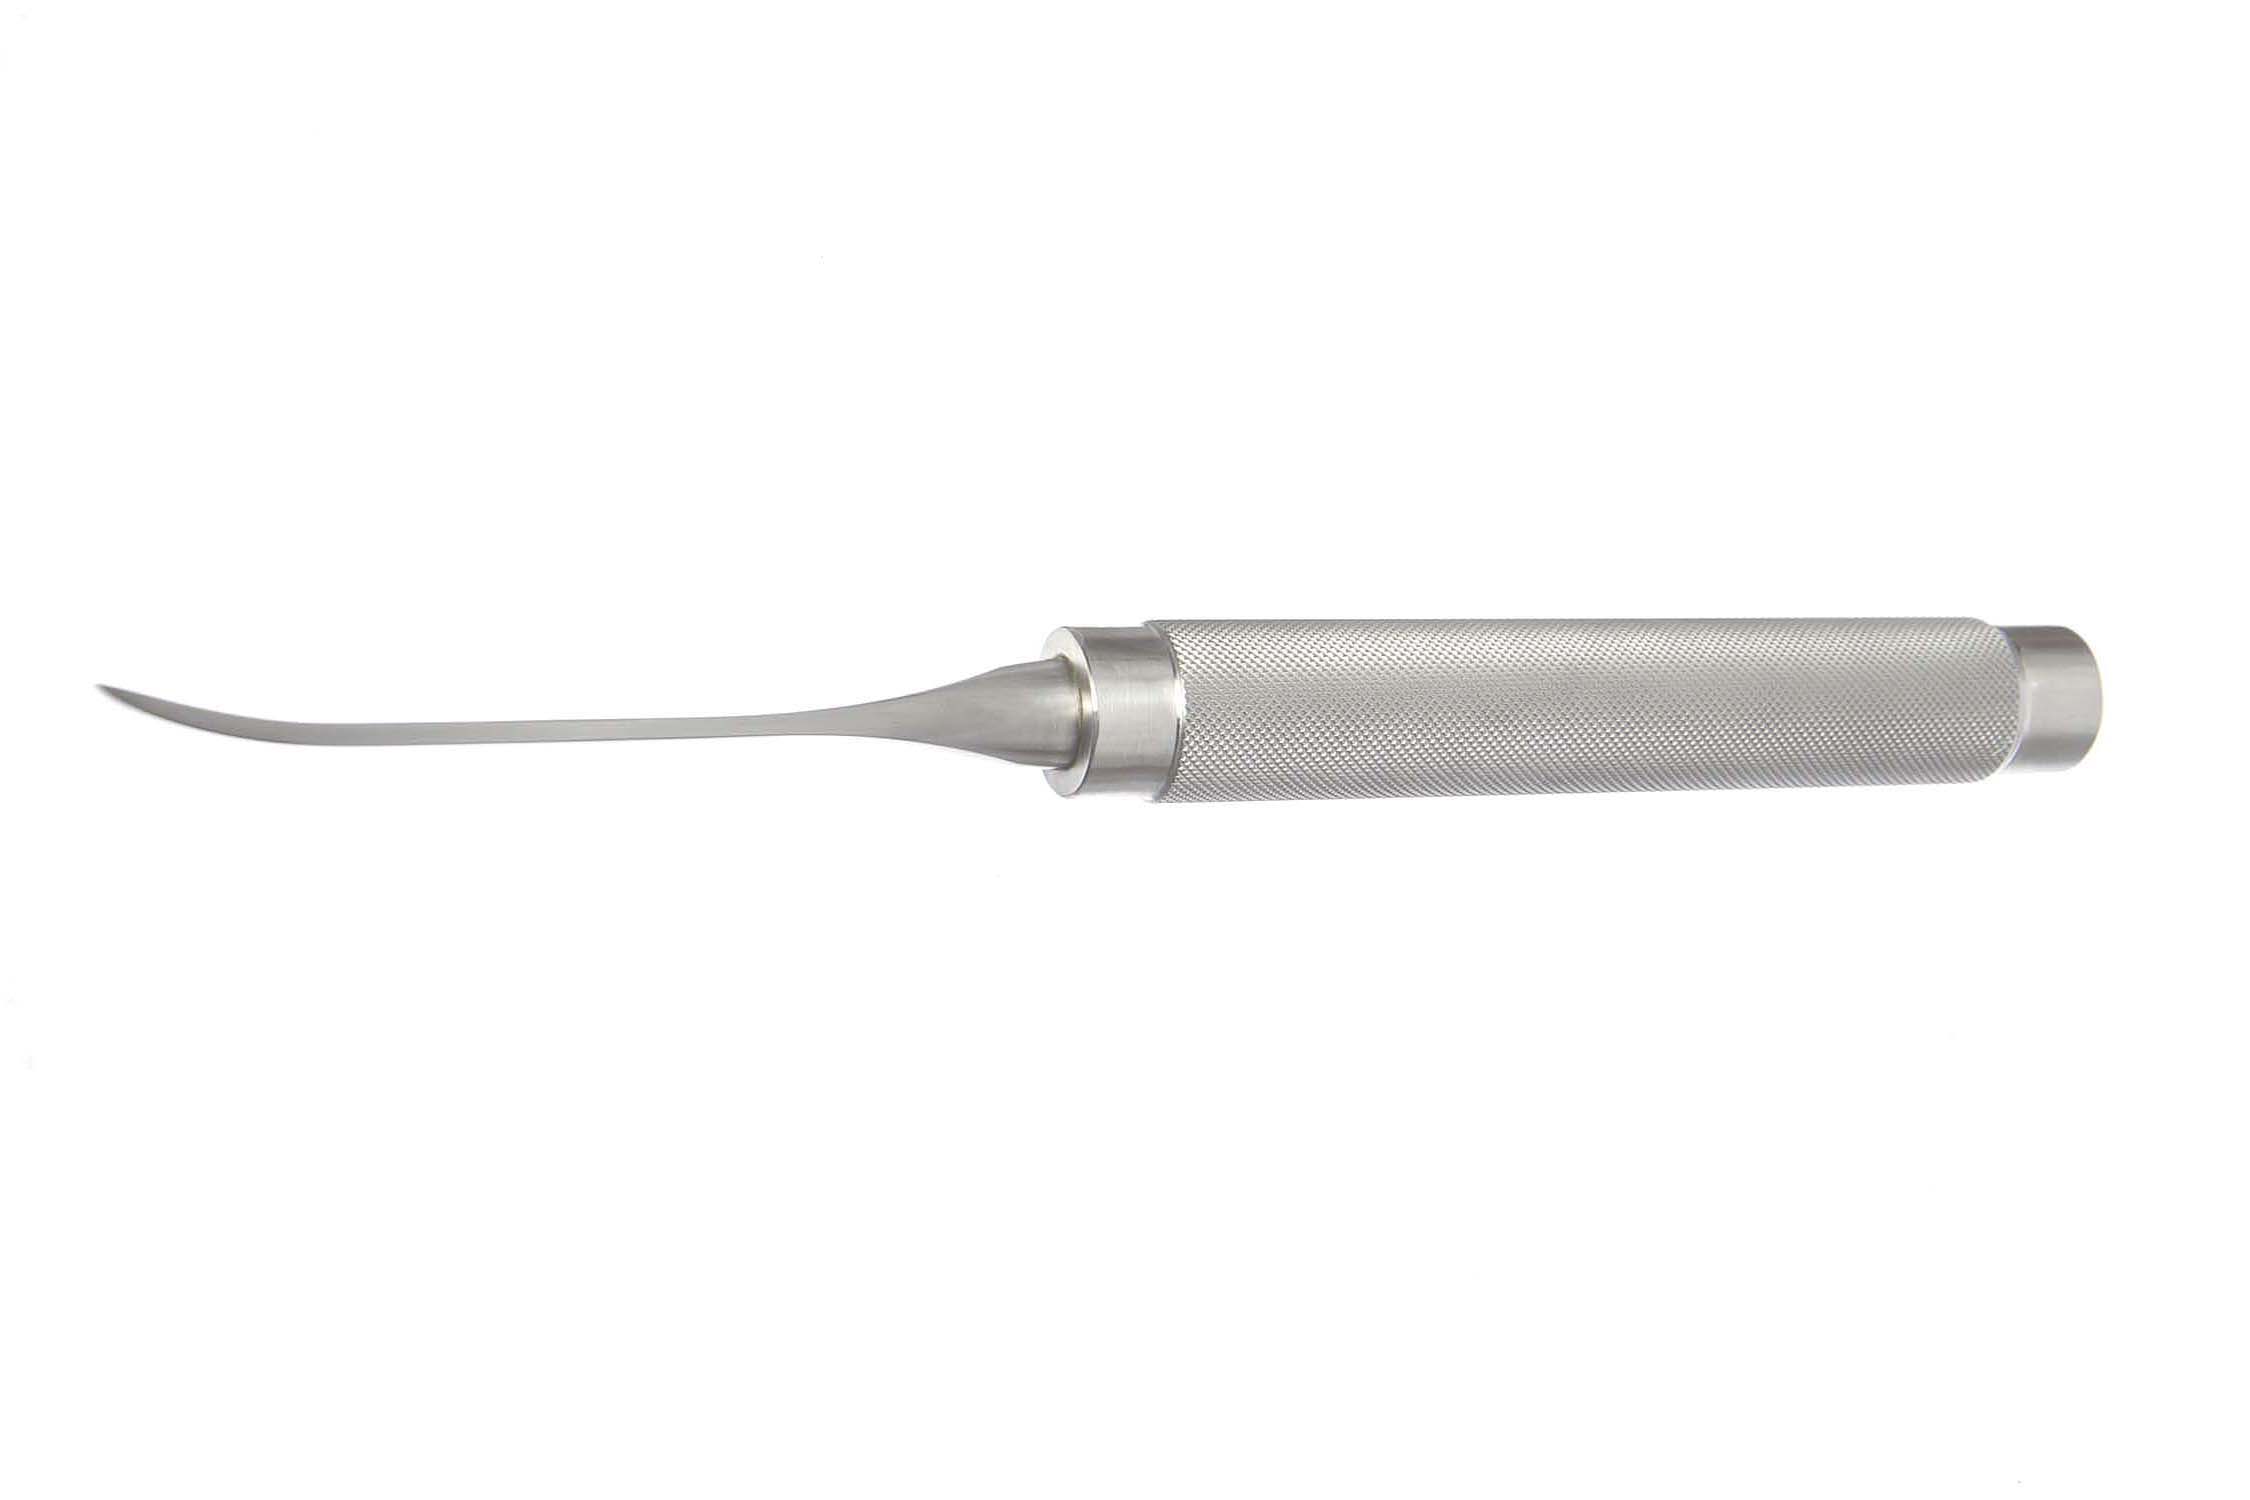 Cobb Osteotome, 11" (28.0 Cm), Curved, 1" (25.0 Mm)